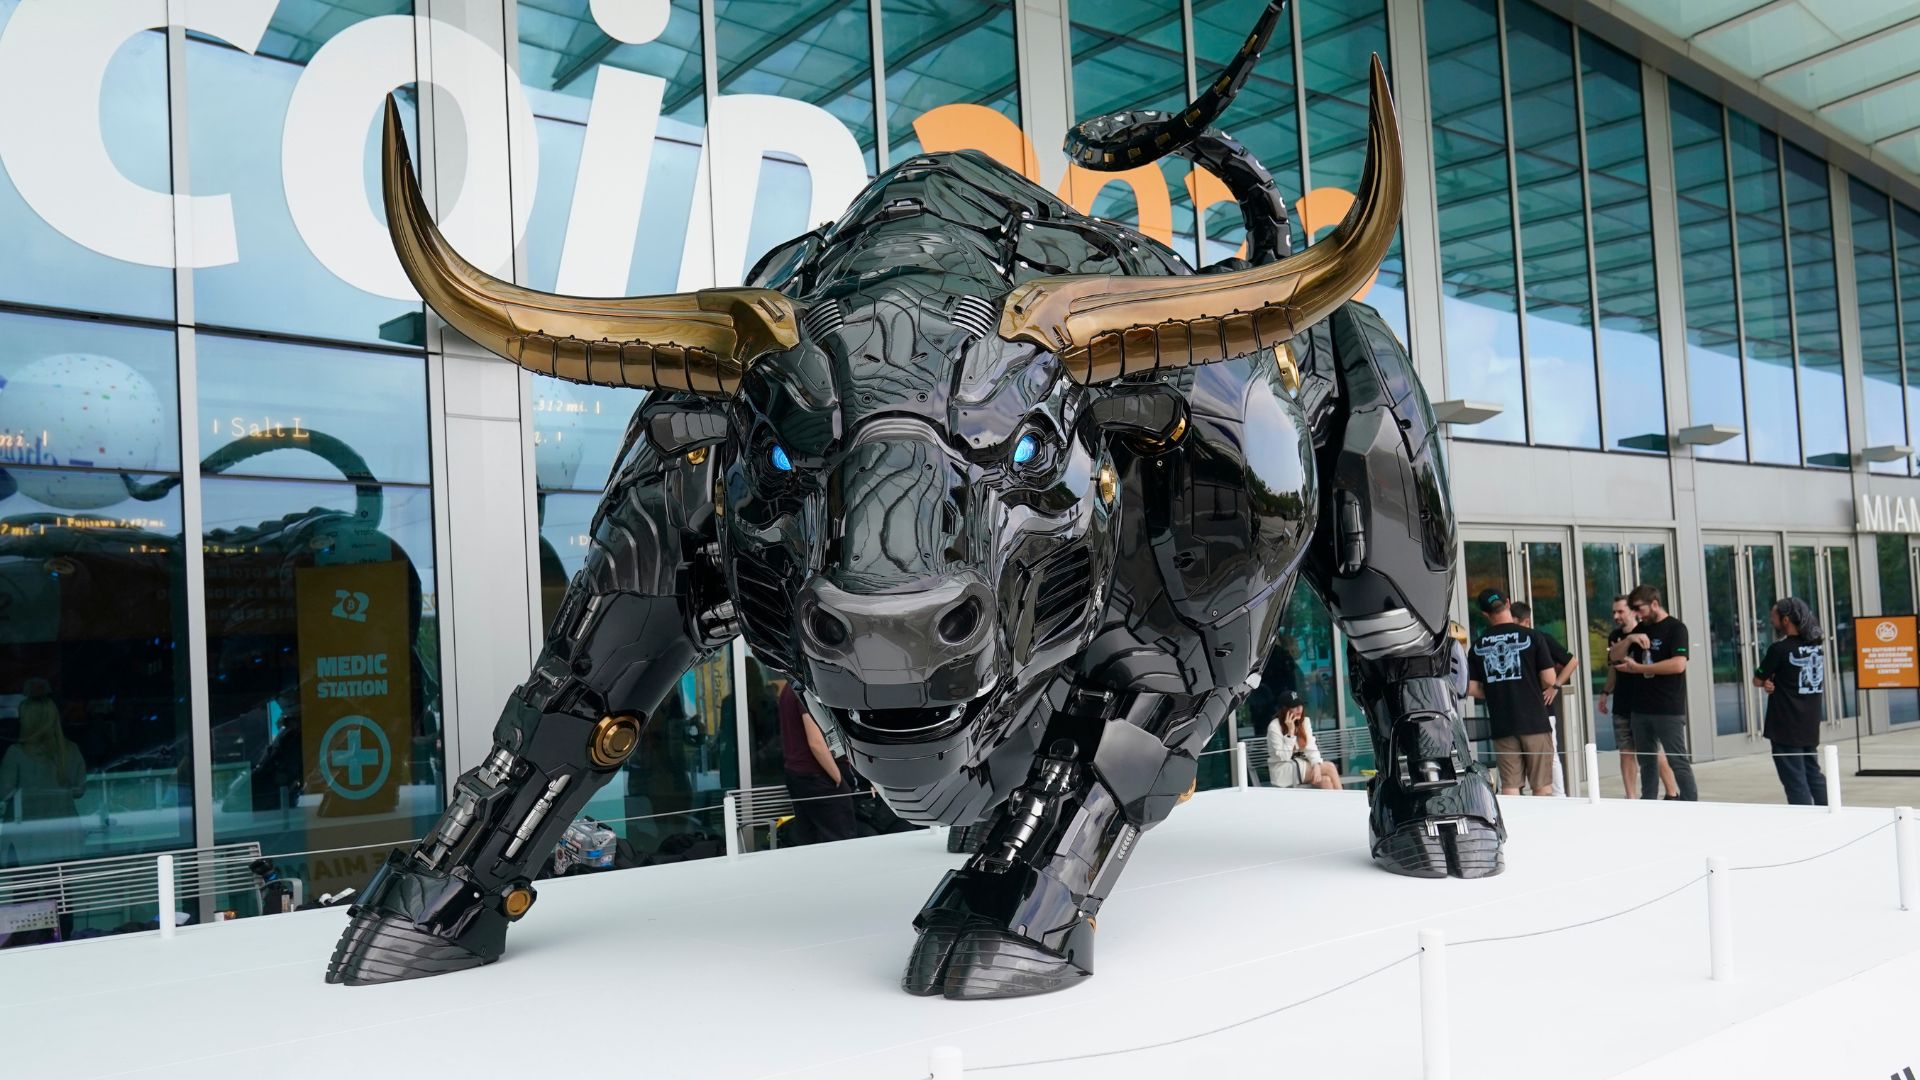 A robot-like bull statue - influenced by the famous bull statue on New York's Wall Street - stands outside a digital currency convention in Miami in 2022. /Wilfredo Lee/AP